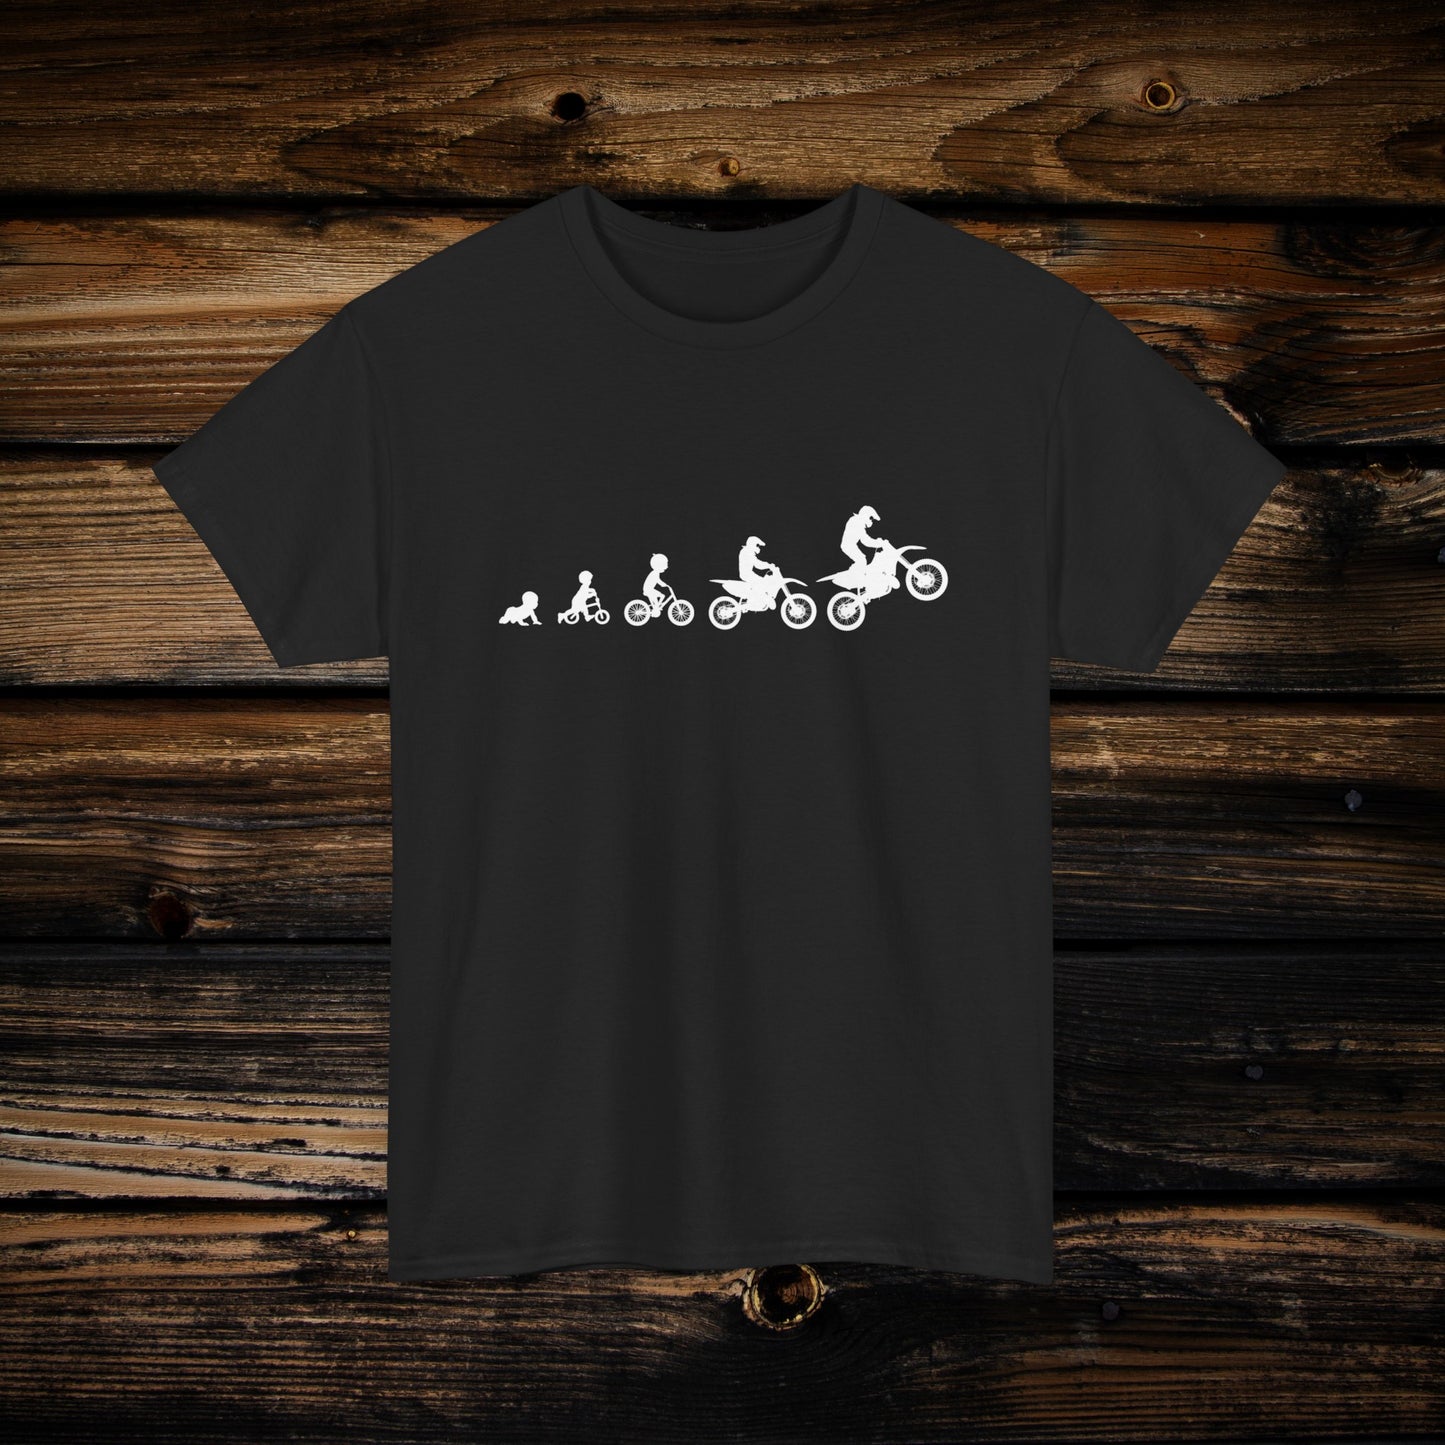 Men's Dirt Bike Evolution Shirt | HEAVY Cotton Adult Unisex t shirt | Dirt bike shirt for men | Dirt bike shirts for boys | From Strider to Bicycle to Dirt Bike | Funny Motocross Shirt for Mom